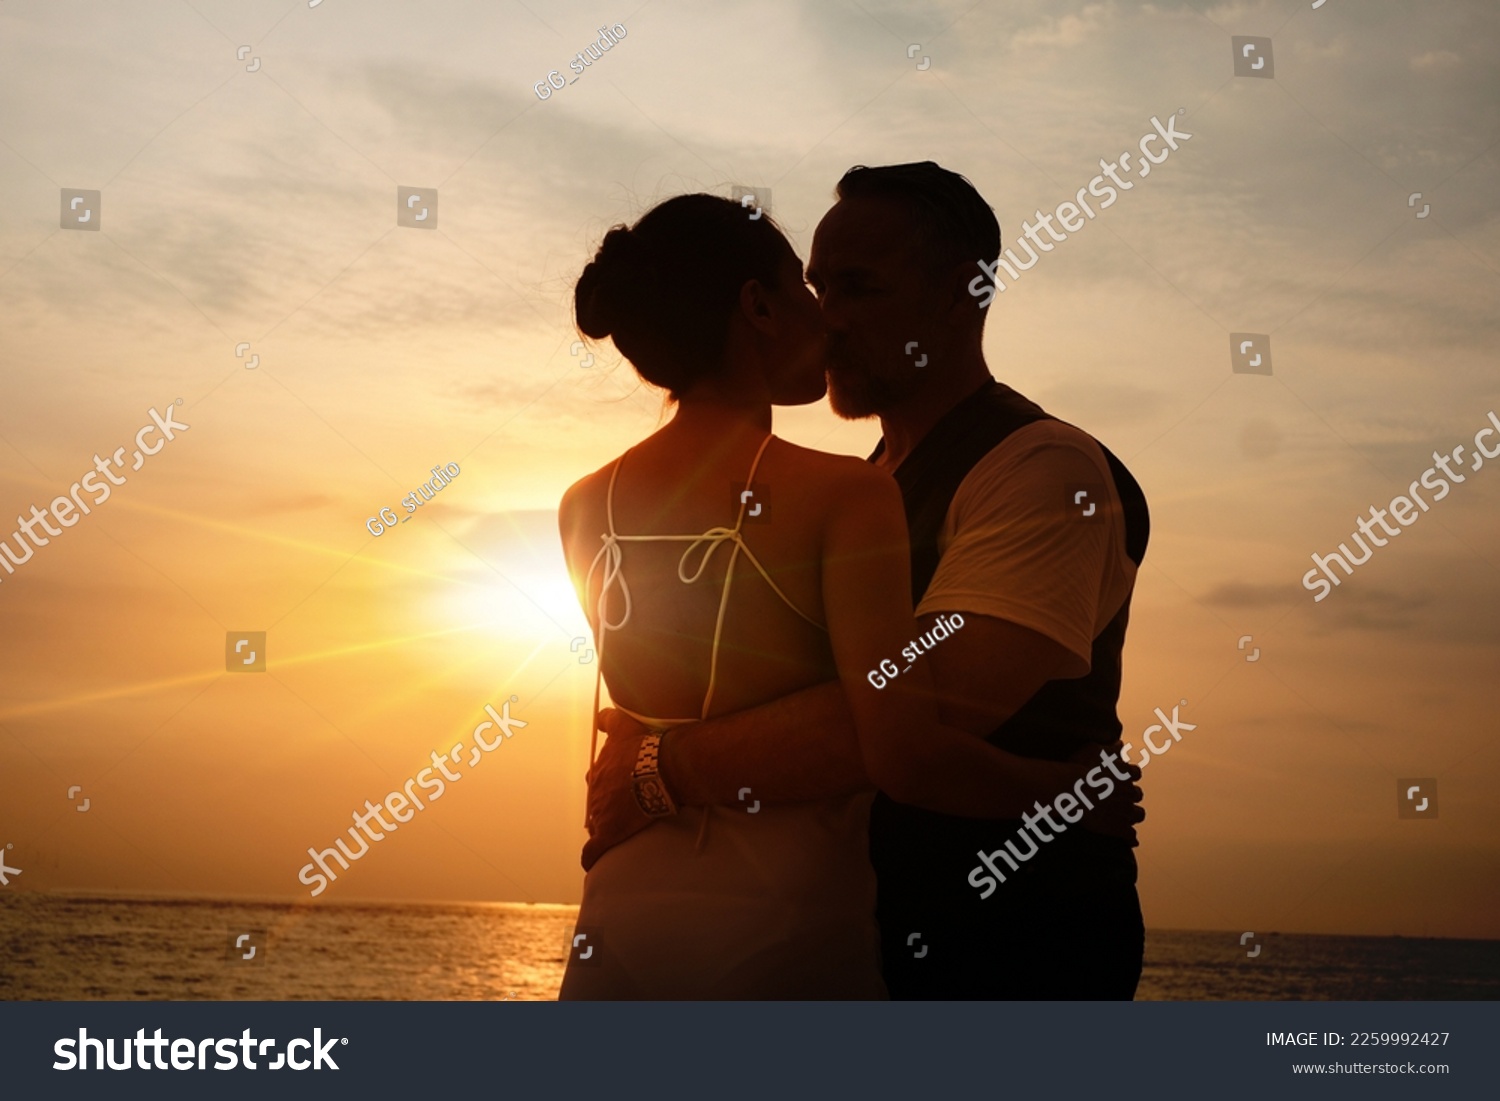 Senior business man and his wife hugging and kissing on celebration event at the yacht deck,Silhouette romance scene marriage anniversary over sunset, luxury and happiness moment #2259992427